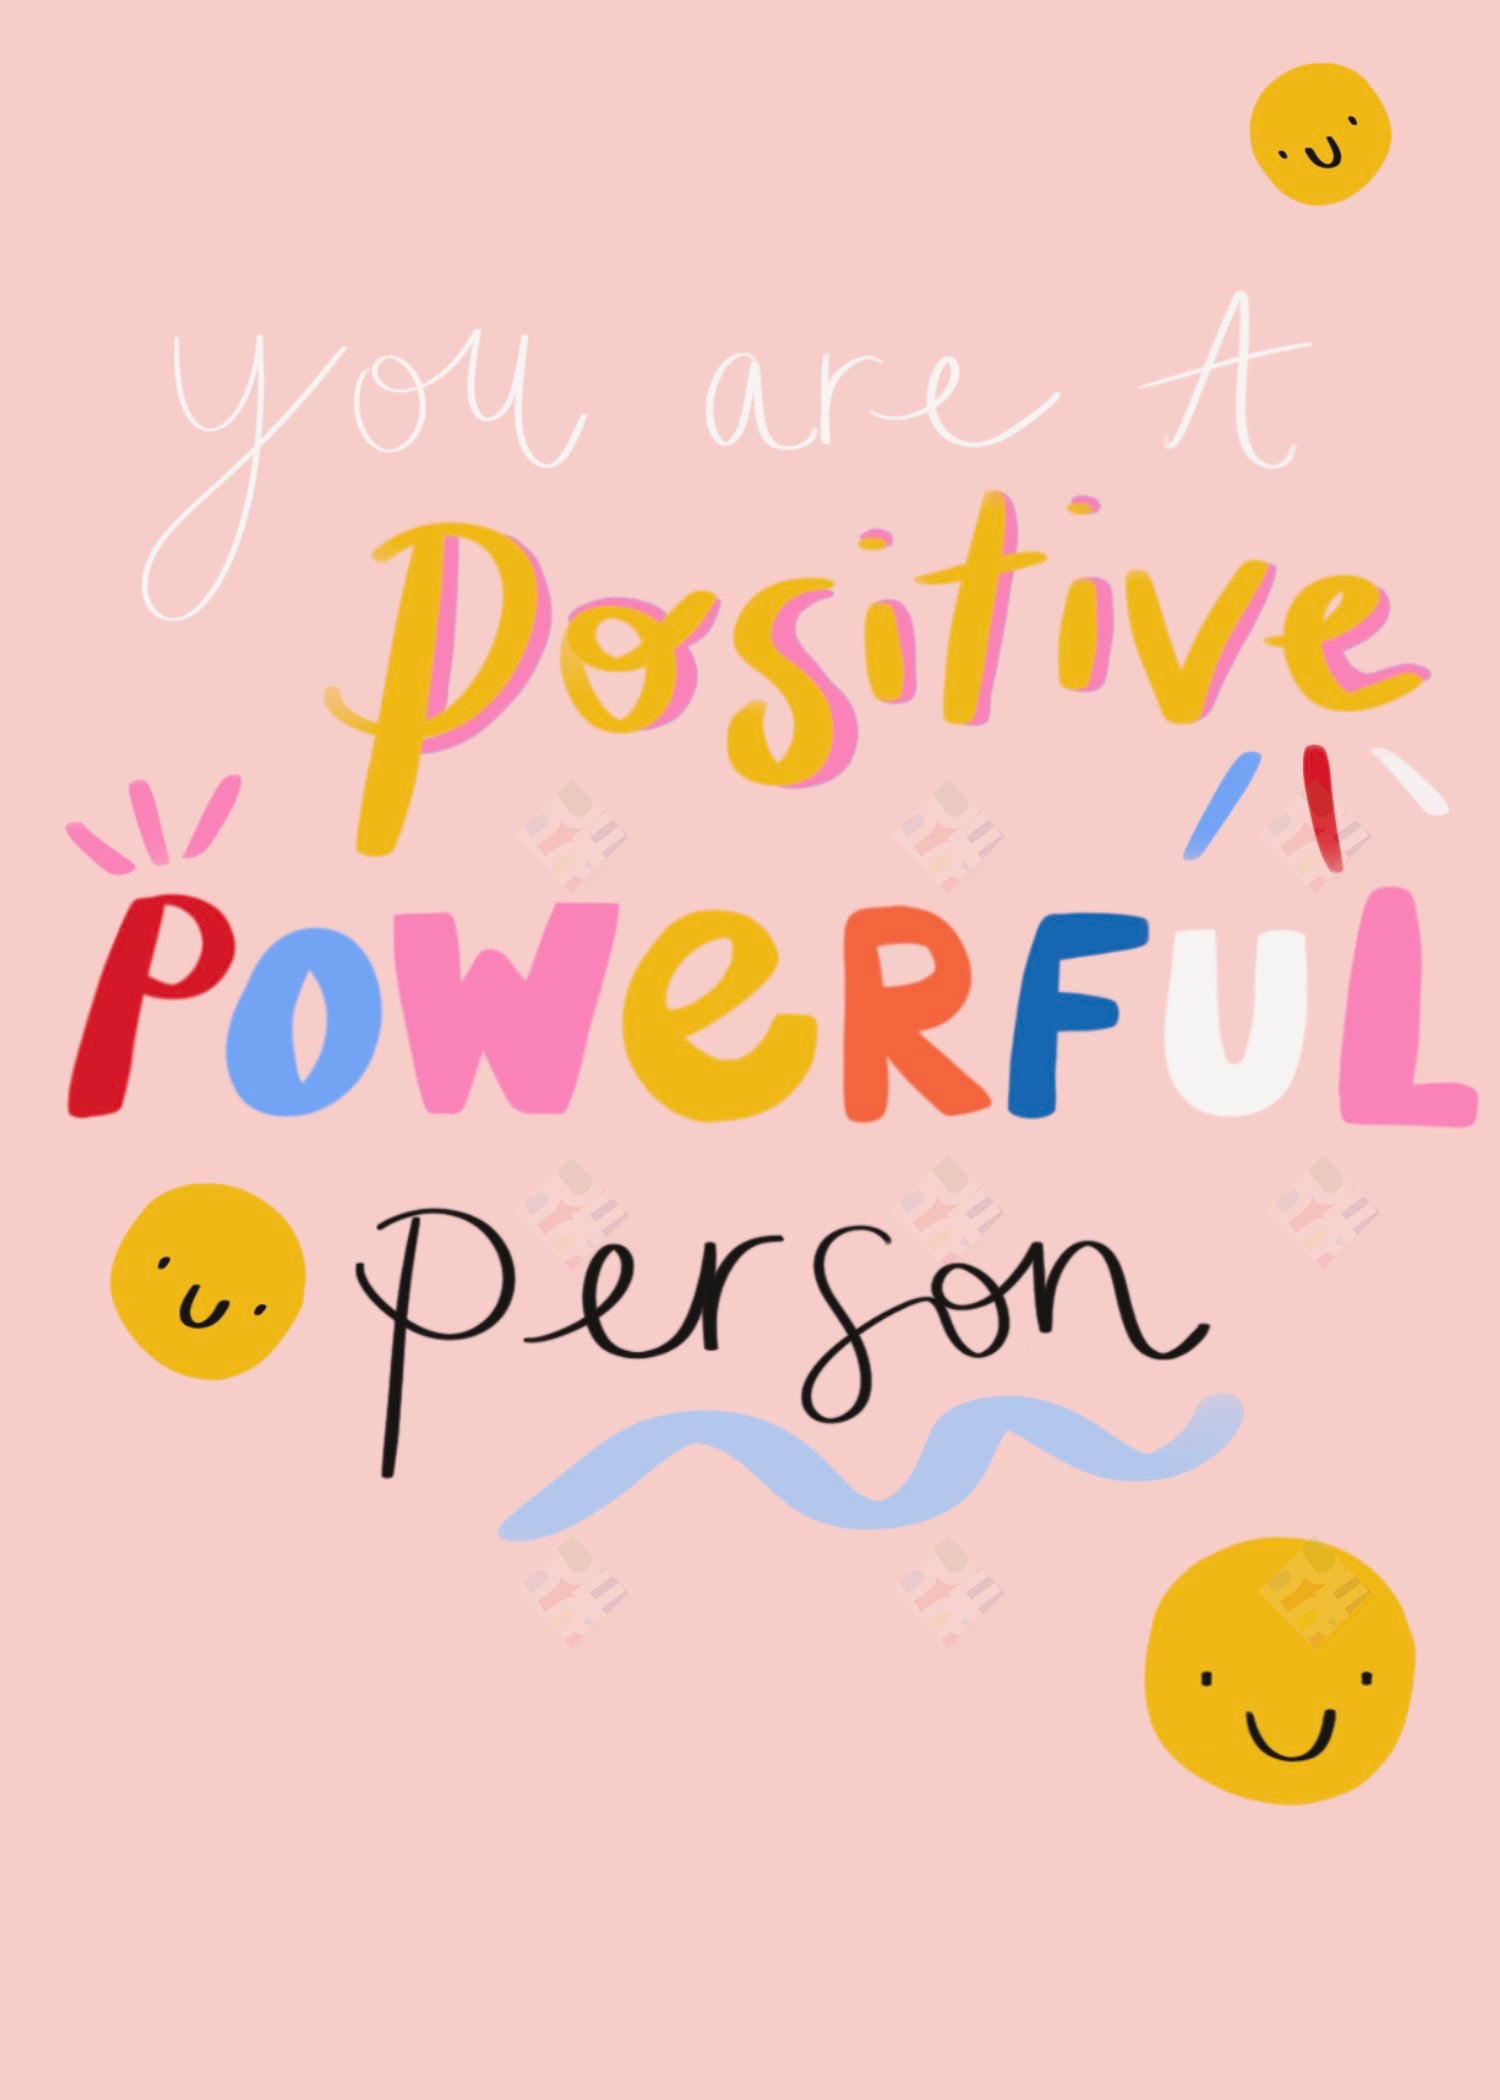 Positive Affirmation Greeting Card Design by Jodie Smith for Pure Art Licensing Agency - Designs and Illustrations for products